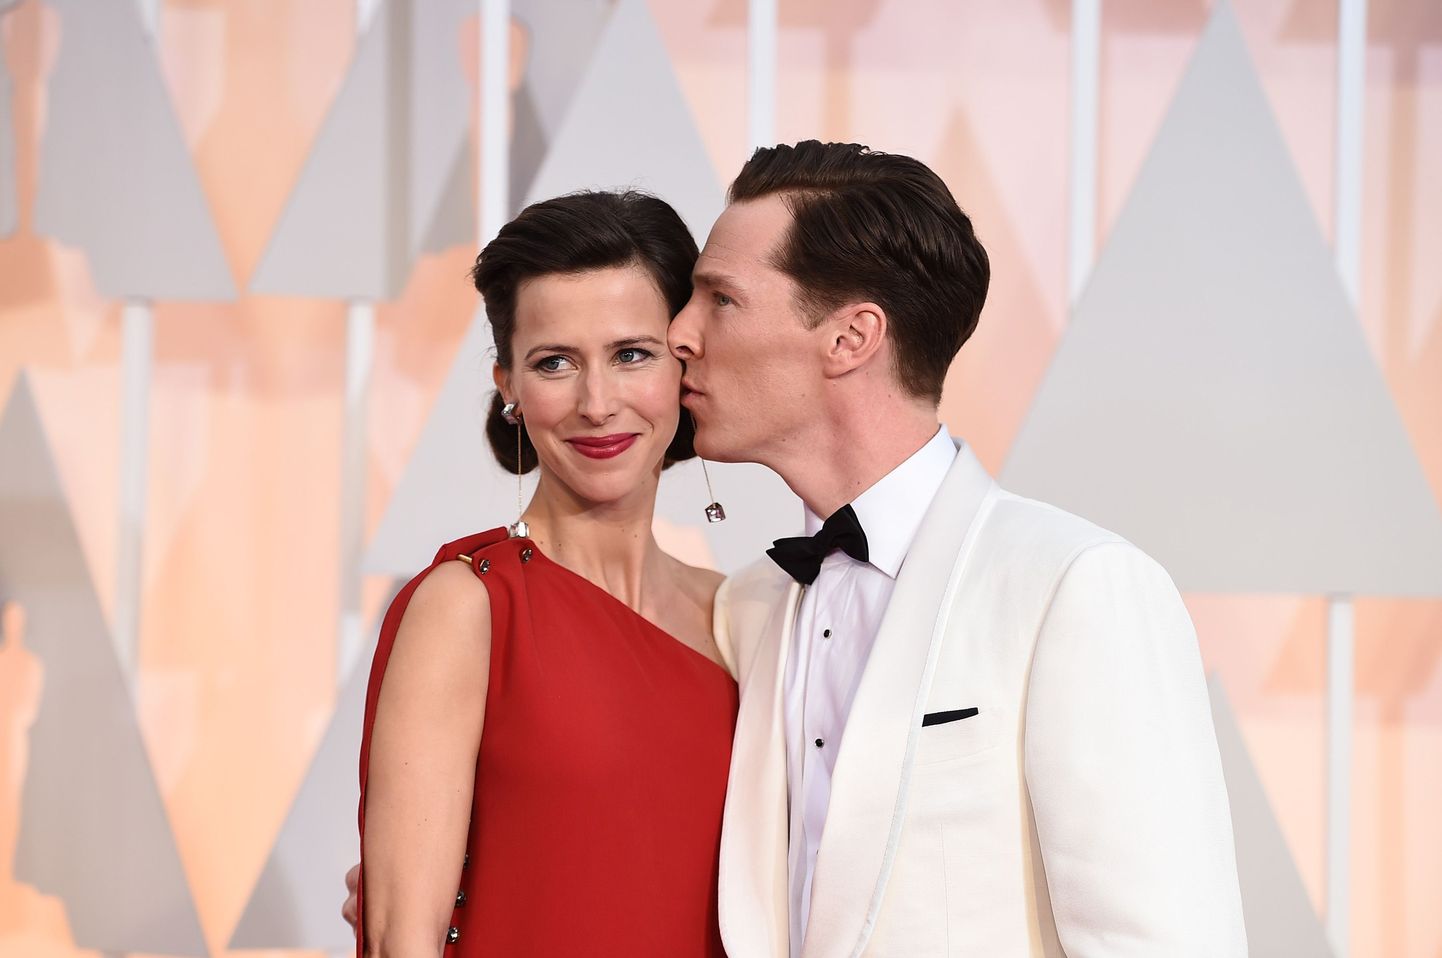 Sophie Hunter, left, and Benedict Cumberbatch arrive at the Oscars on Sunday, Feb. 22, 2015, at the Dolby Theatre in Los Angeles. (Photo by Jordan Strauss/Invision/AP)